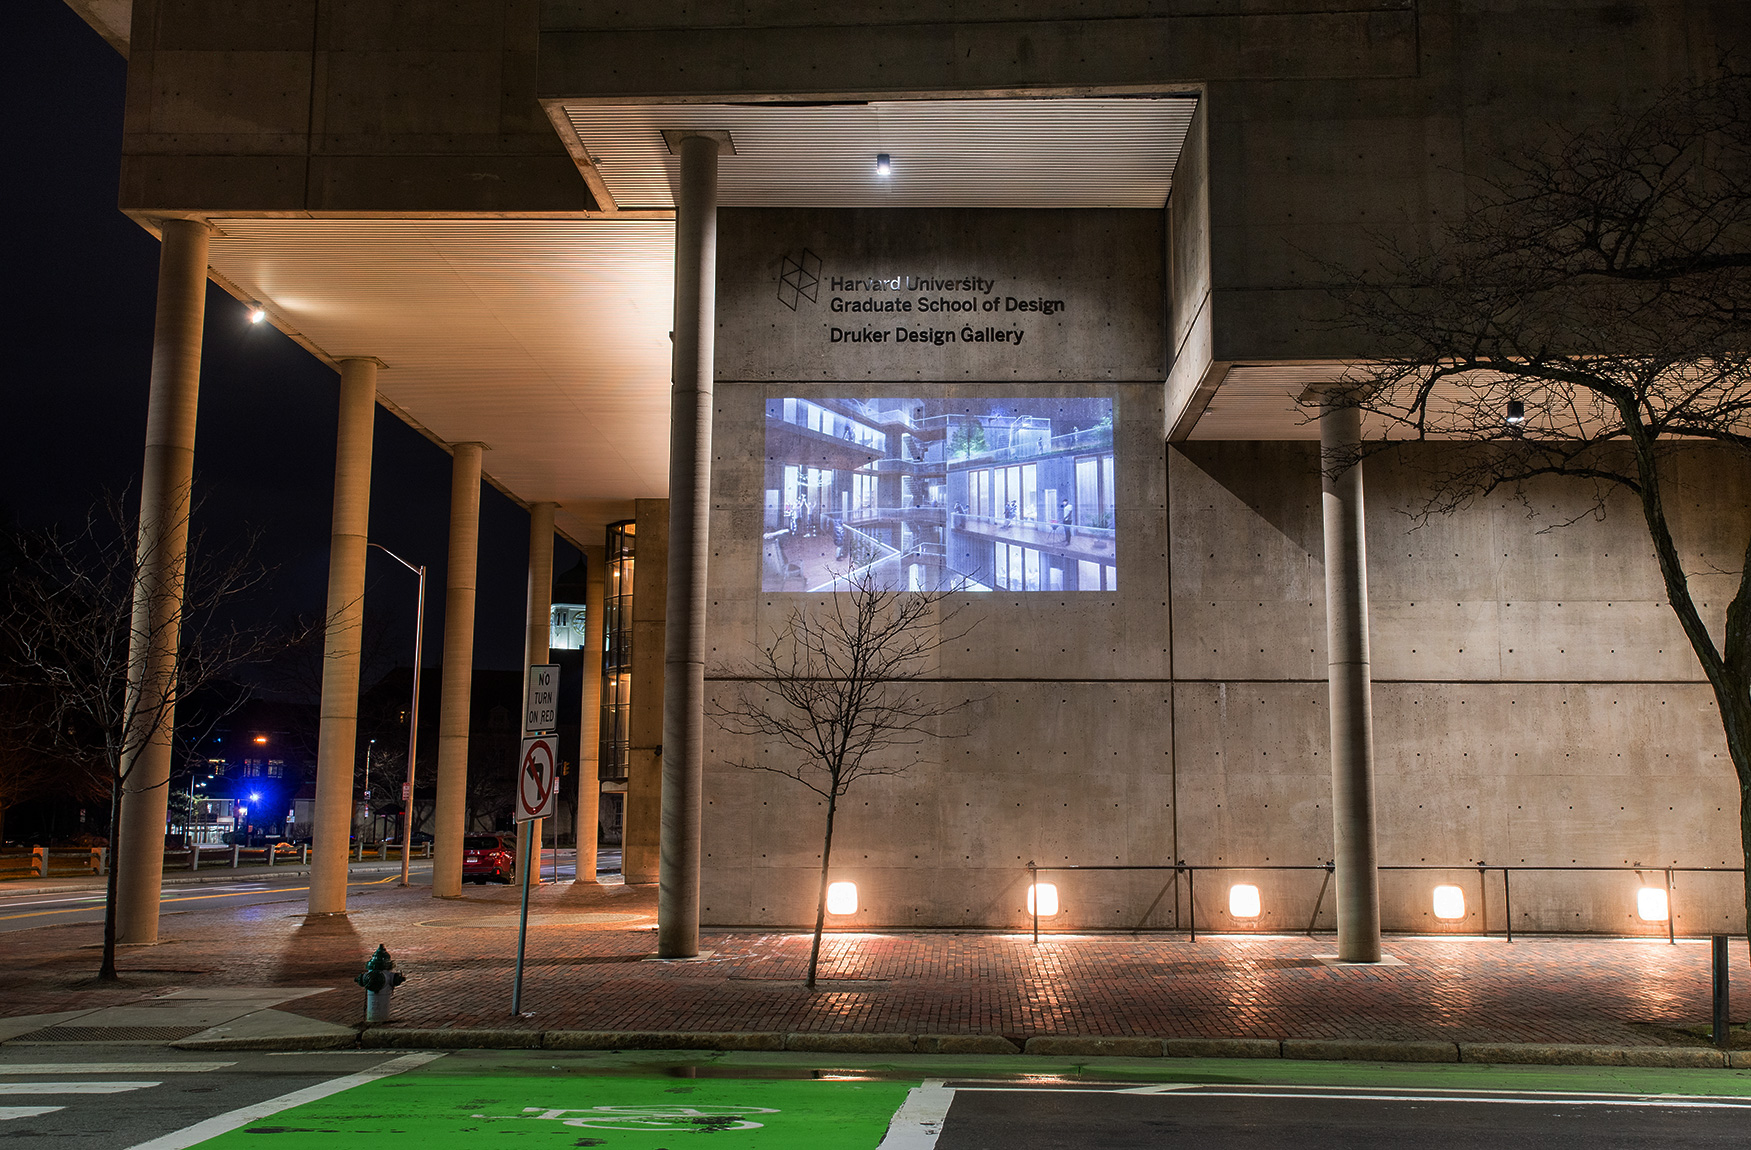 The Cambridge Street facade of Gund hall at night. On the wall is projected an image of a nighttime scene of the courtyard of a residential building with multiple levels of windows and balconies and people participating in various activities.